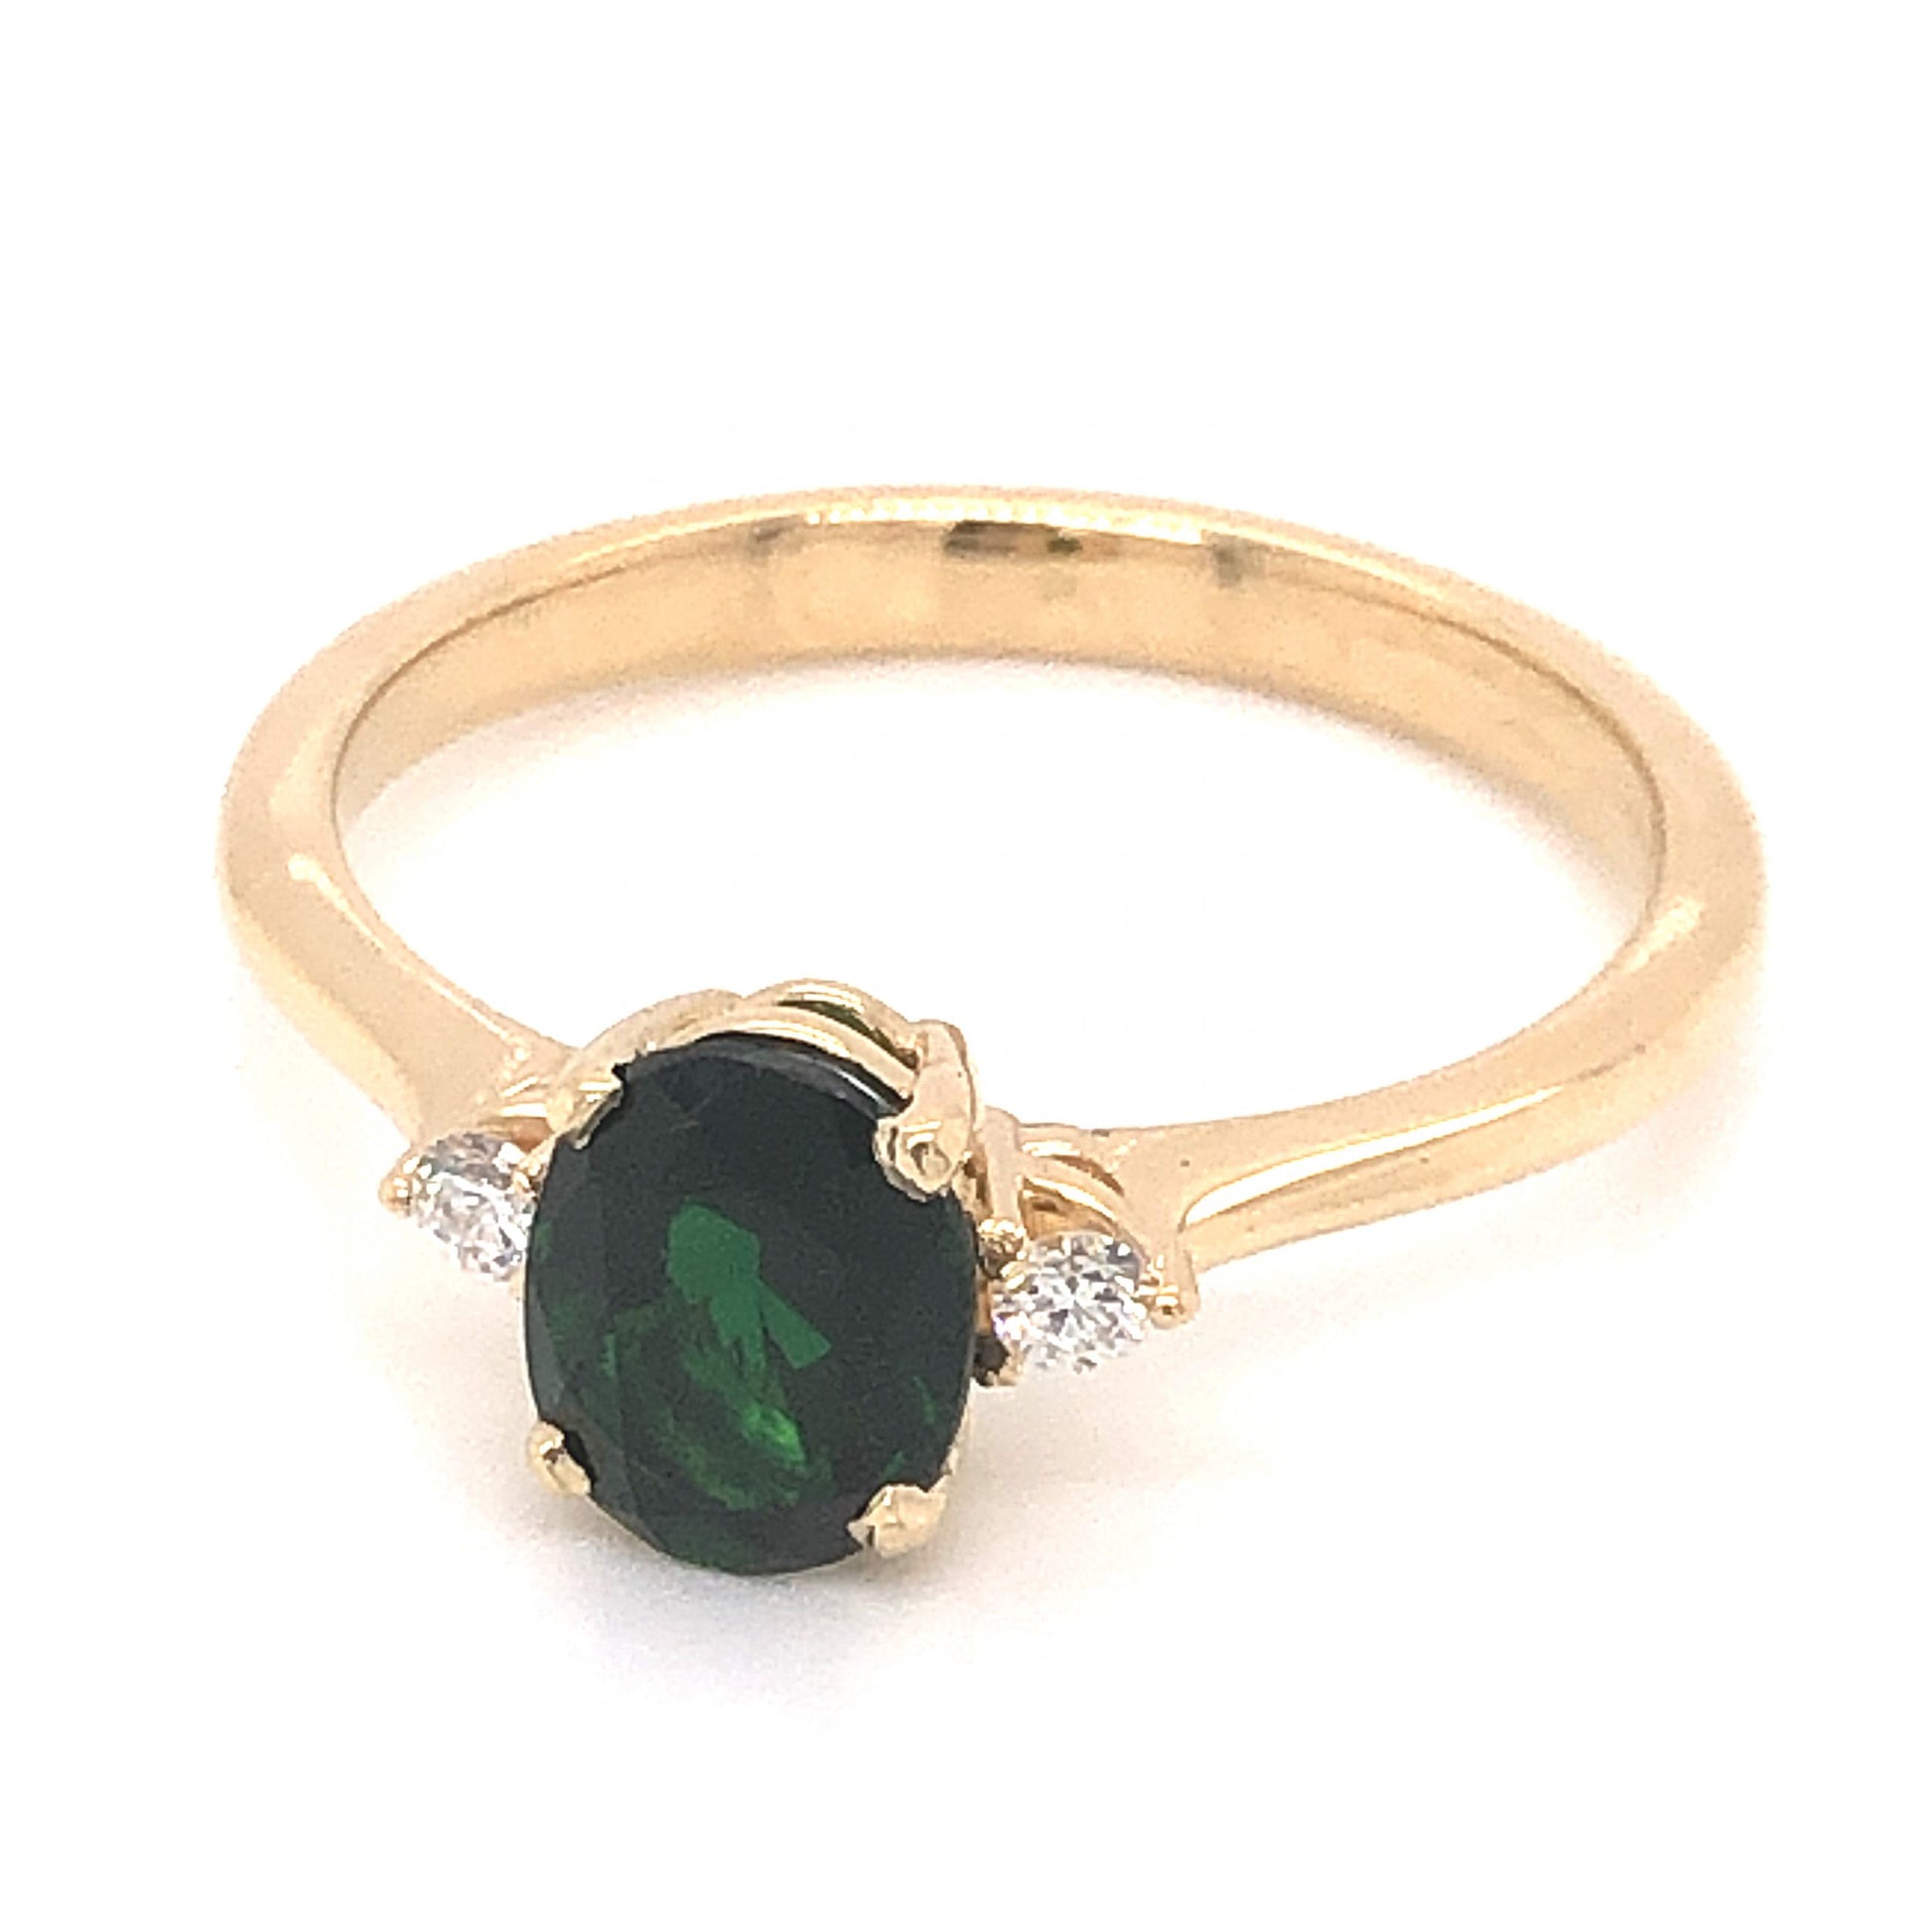 1.02 Oval Cut Tourmaline & Diamond Ring in 14k Yellow GoldComposition: PlatinumRing Size: 7Total Diamond Weight: .08 ctTotal Gram Weight: 2.5 gInscription: 14k